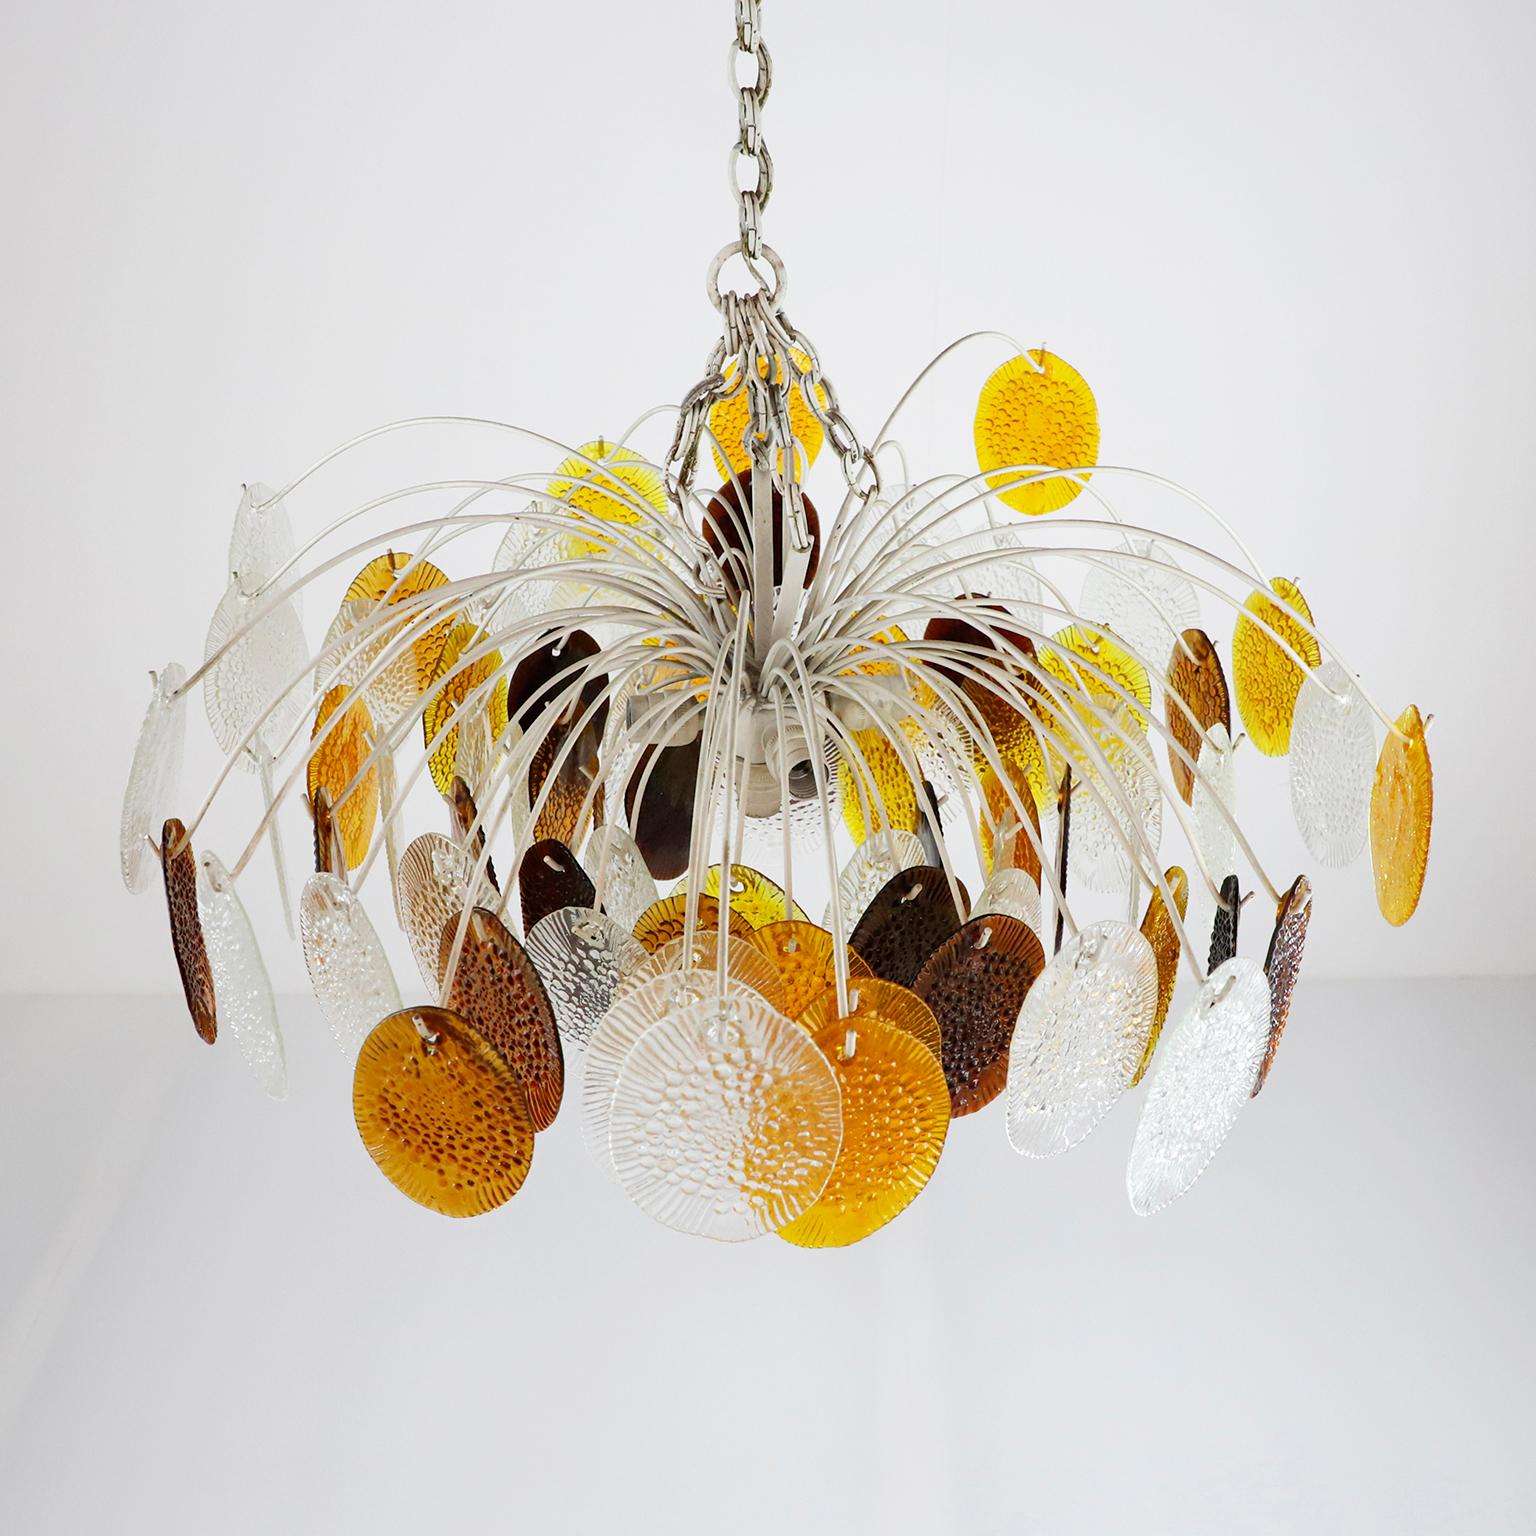 Circa 1960, We offer this hanging chandelier with custom- hand made glass pendants in transparent and ambar tones. 77 pieces of glass each piece of glass size 15 x 11 cm. aprox.

  